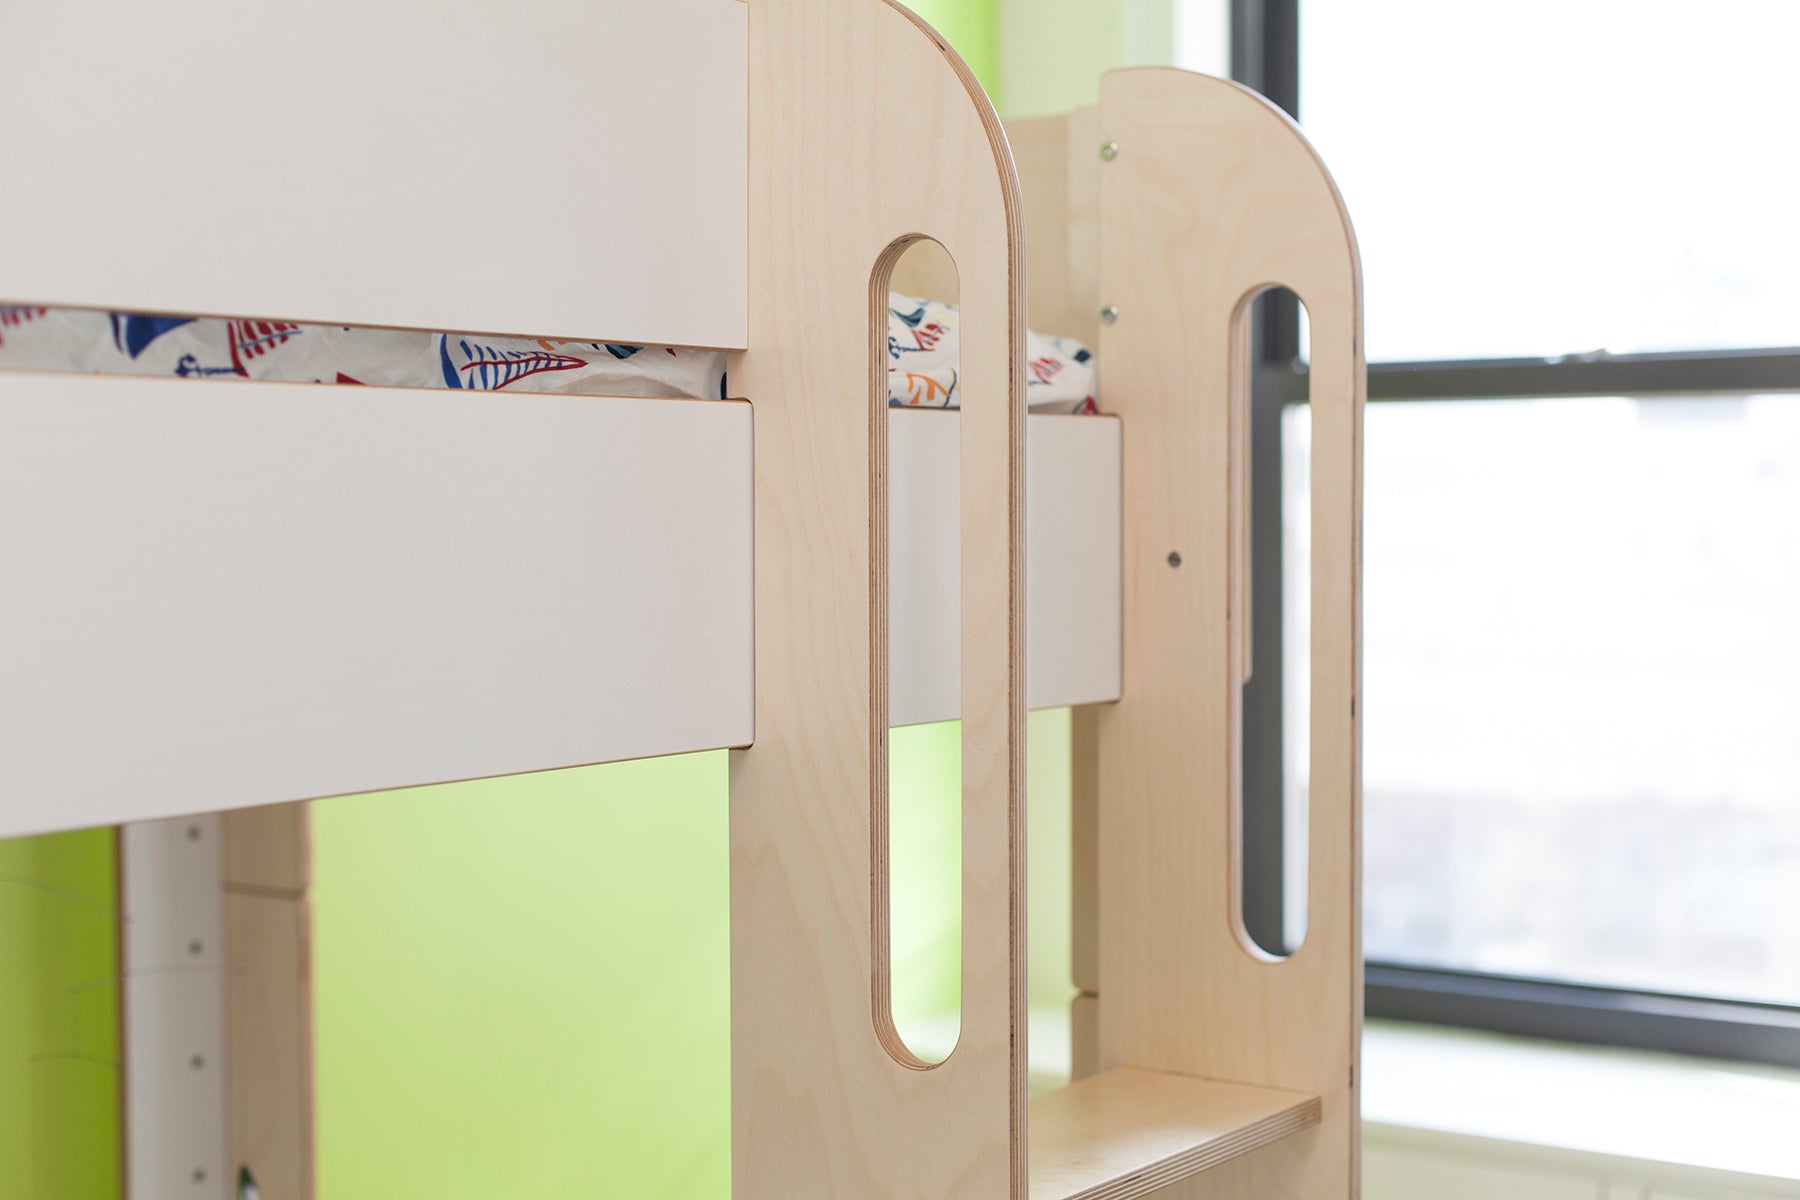 Indoor wooden play structure with green accents by a window.